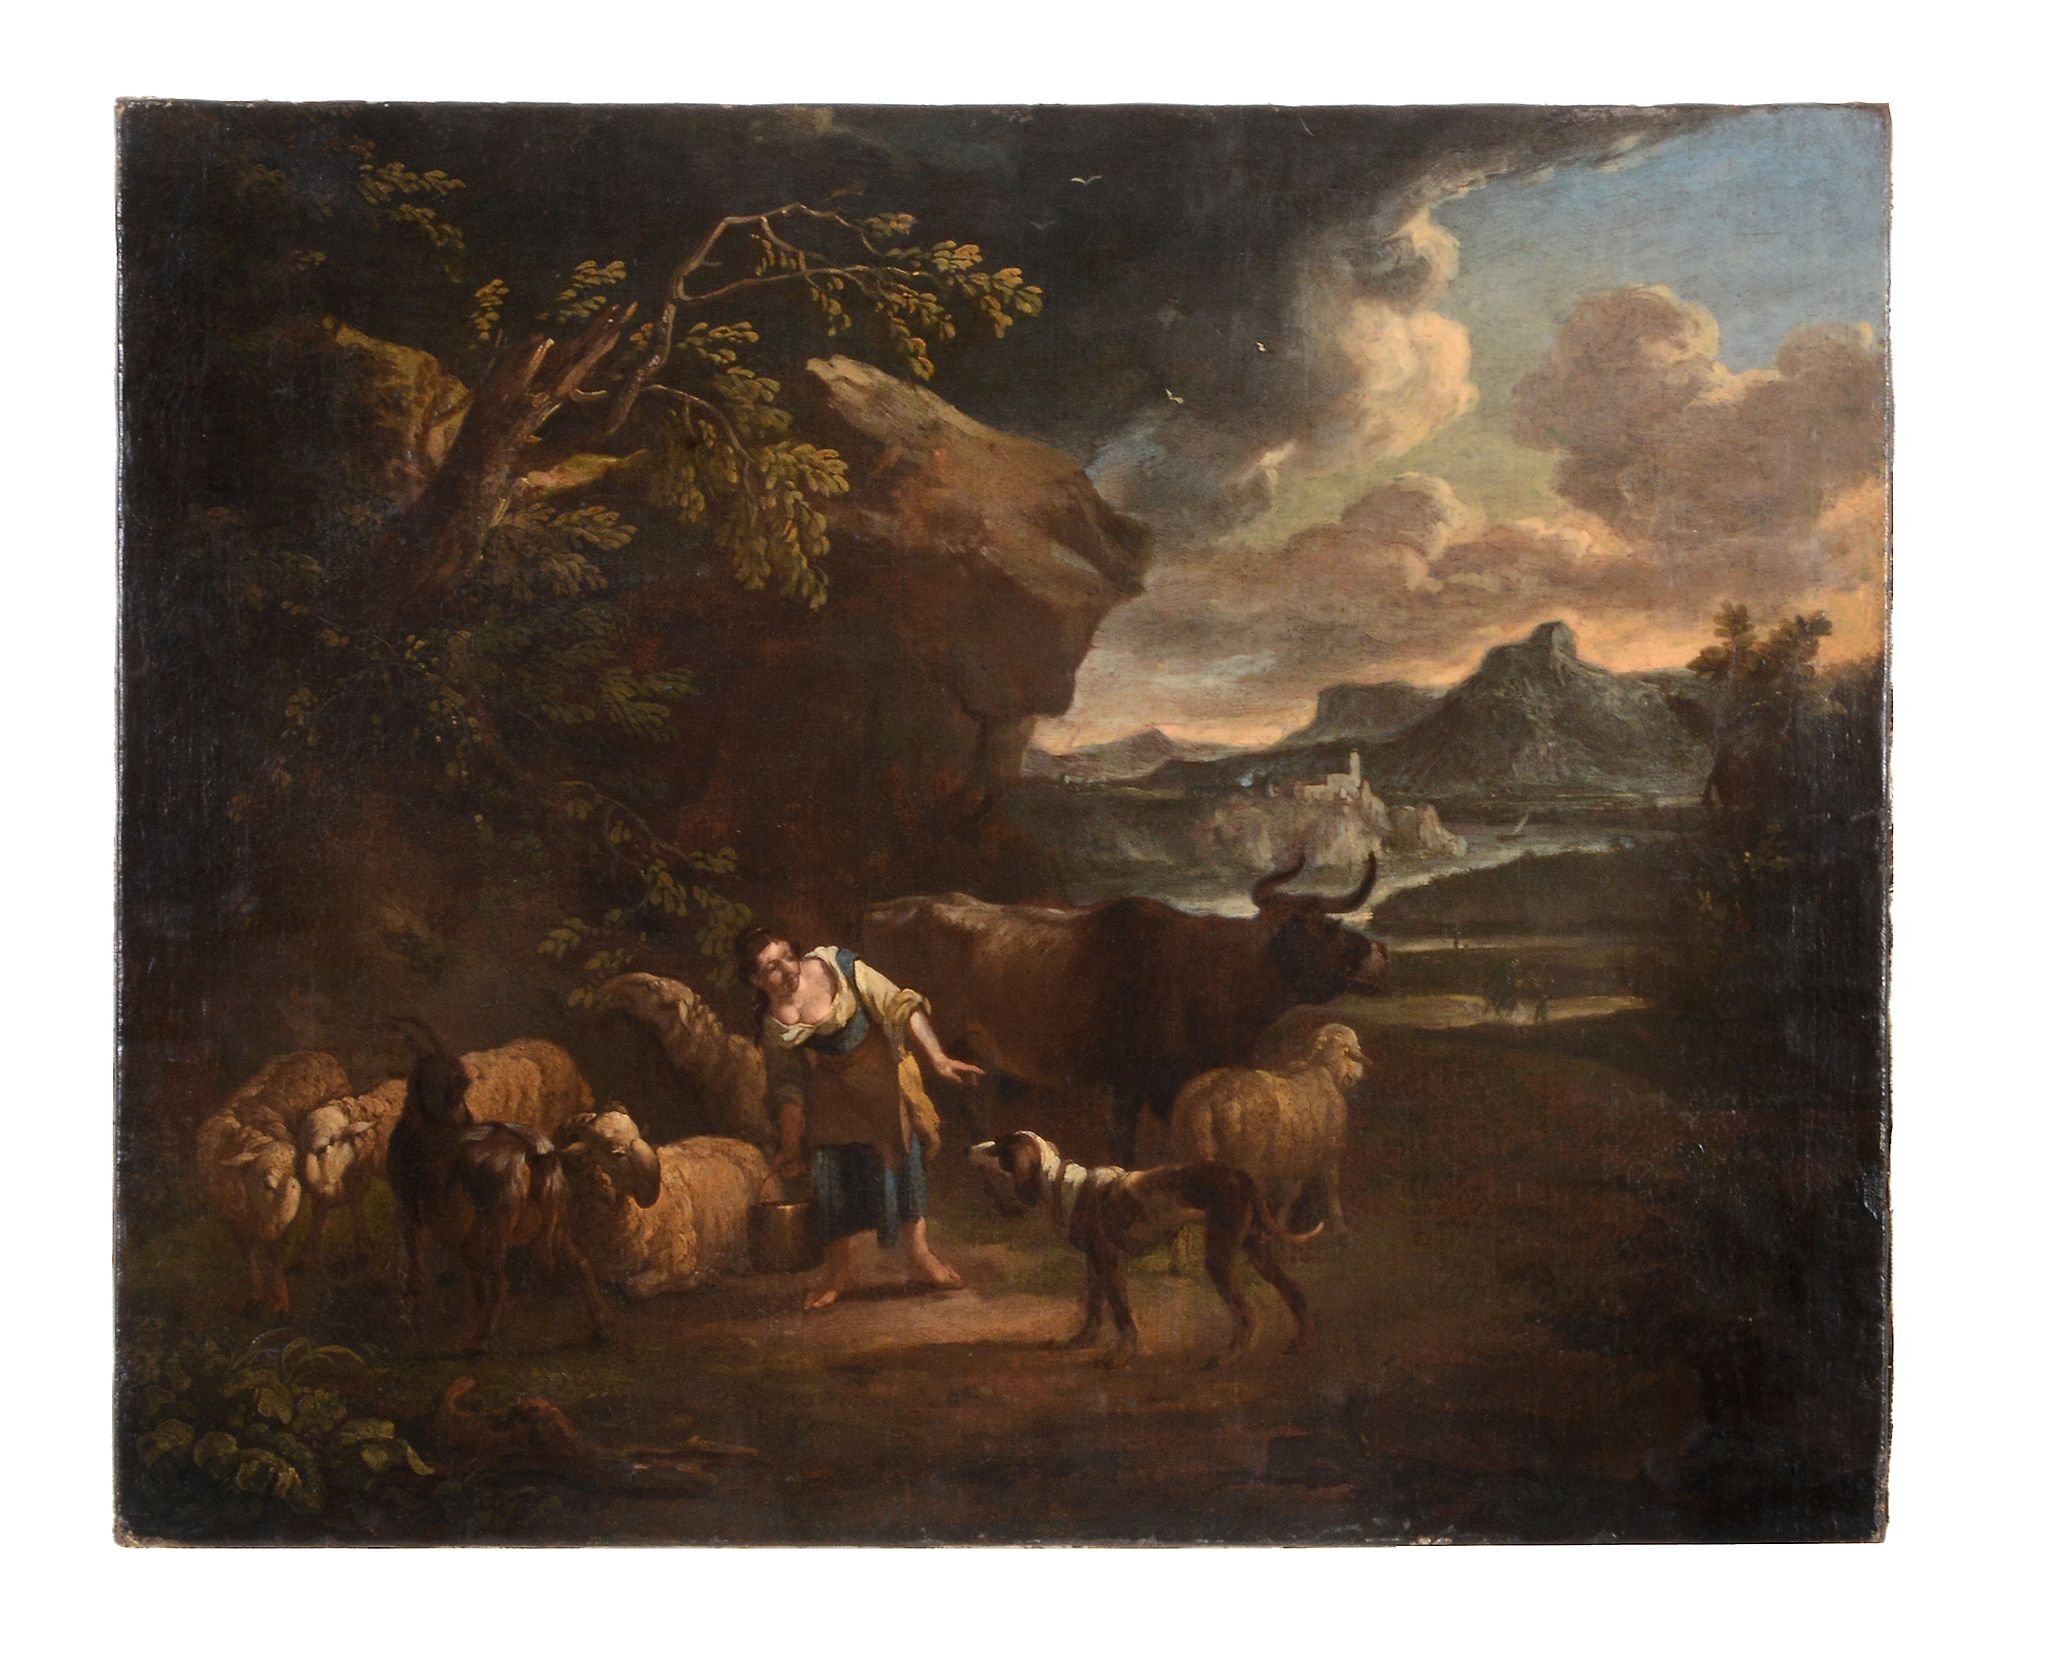 Follower Nicolaes Berchem (1620-1683) - A wooded river landscape with a sheperdess and her flock - Image 2 of 3